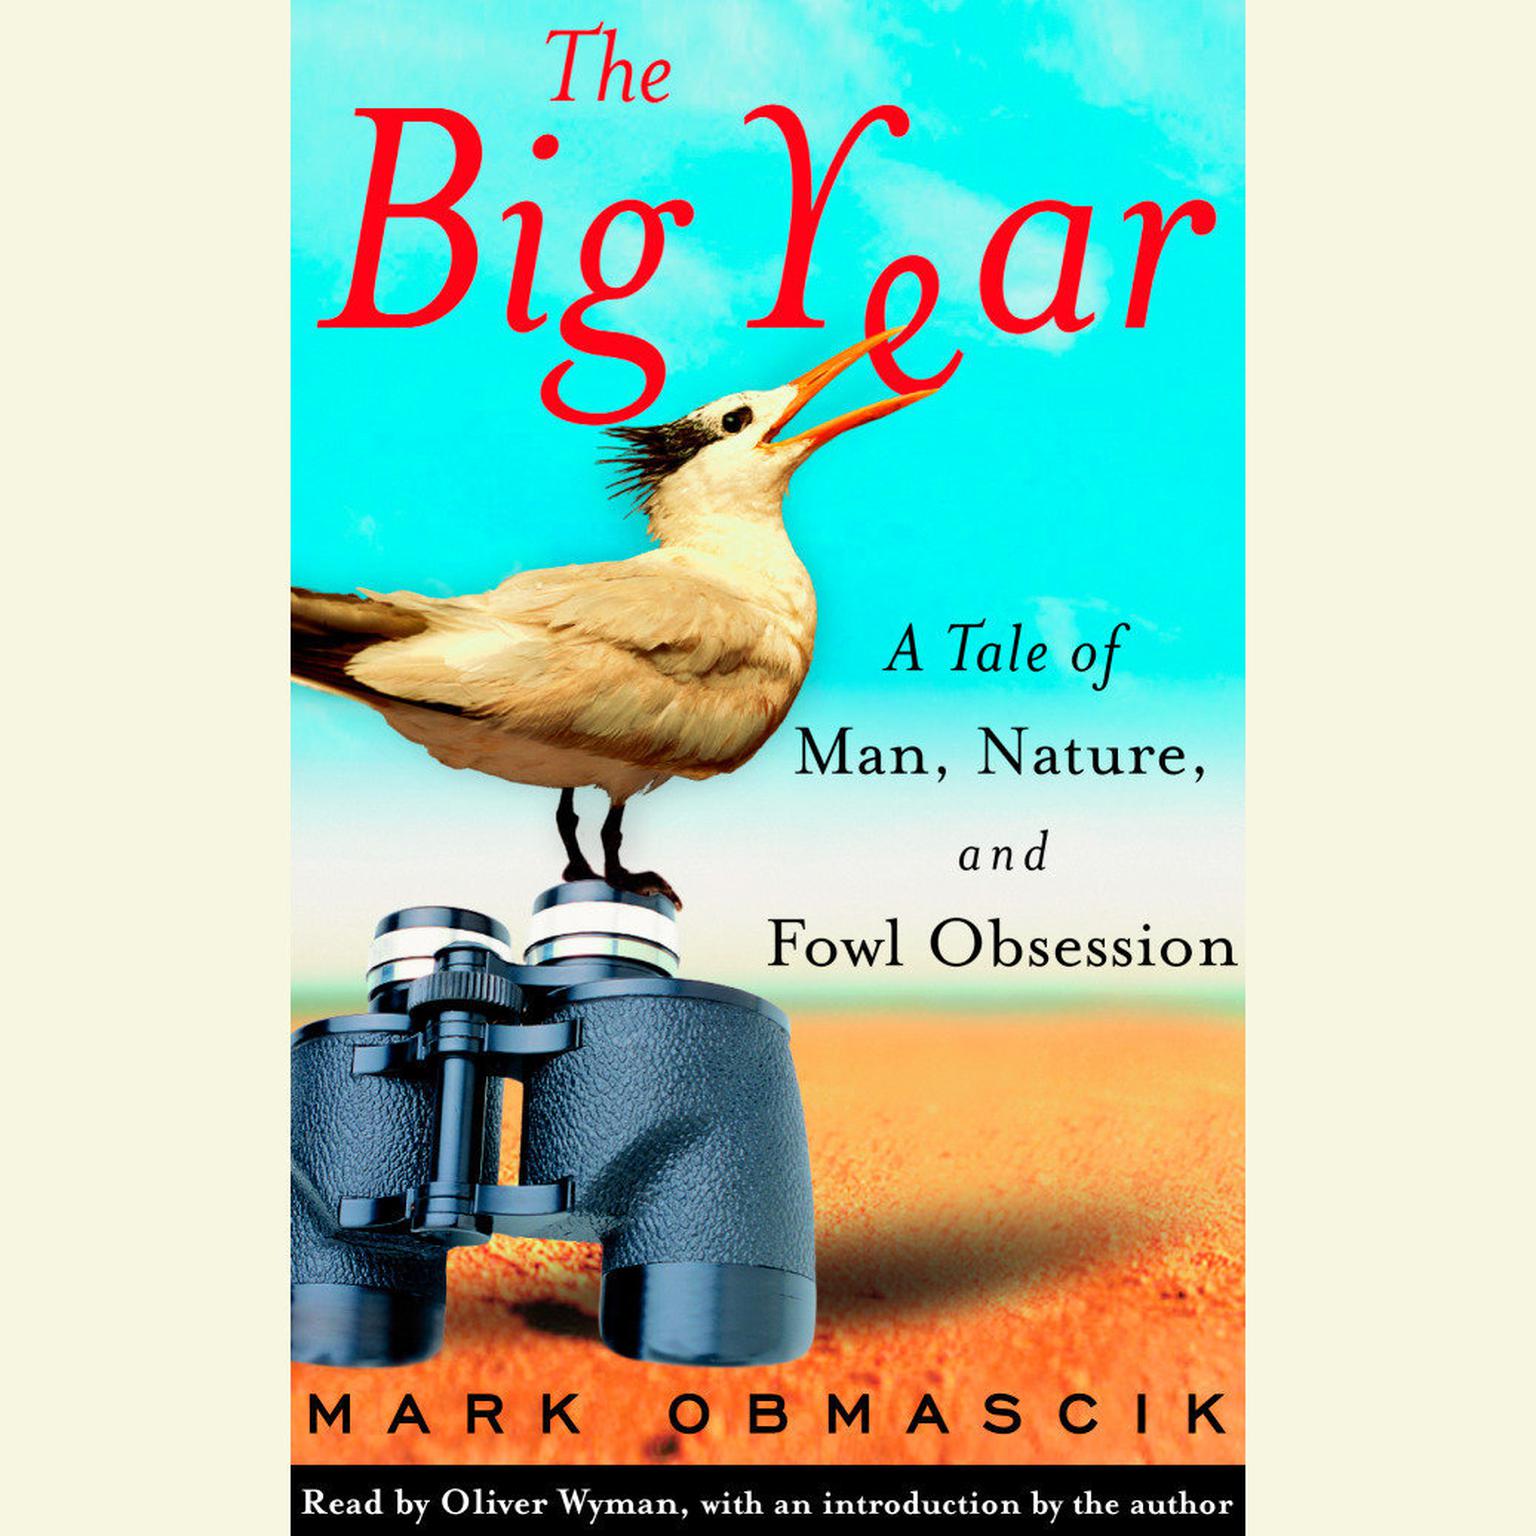 The Big Year (Abridged): A Tale of Man, Nature, and Fowl Obsession Audiobook, by Mark Obmascik